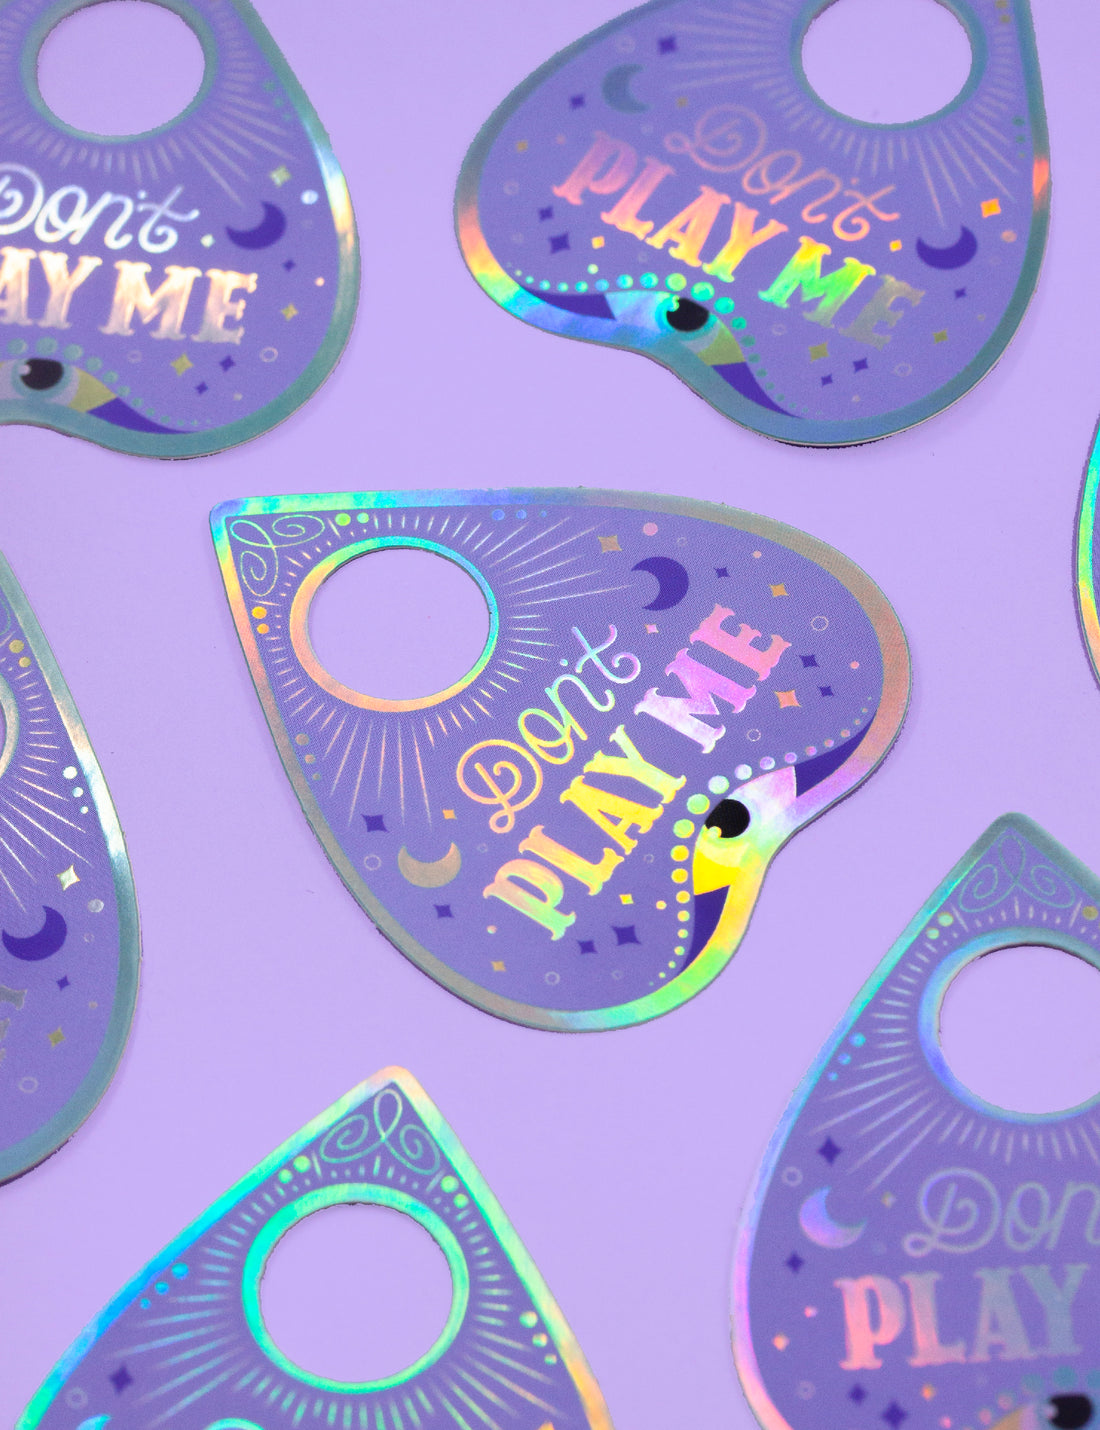 Don't play me Ouija holographic sticker